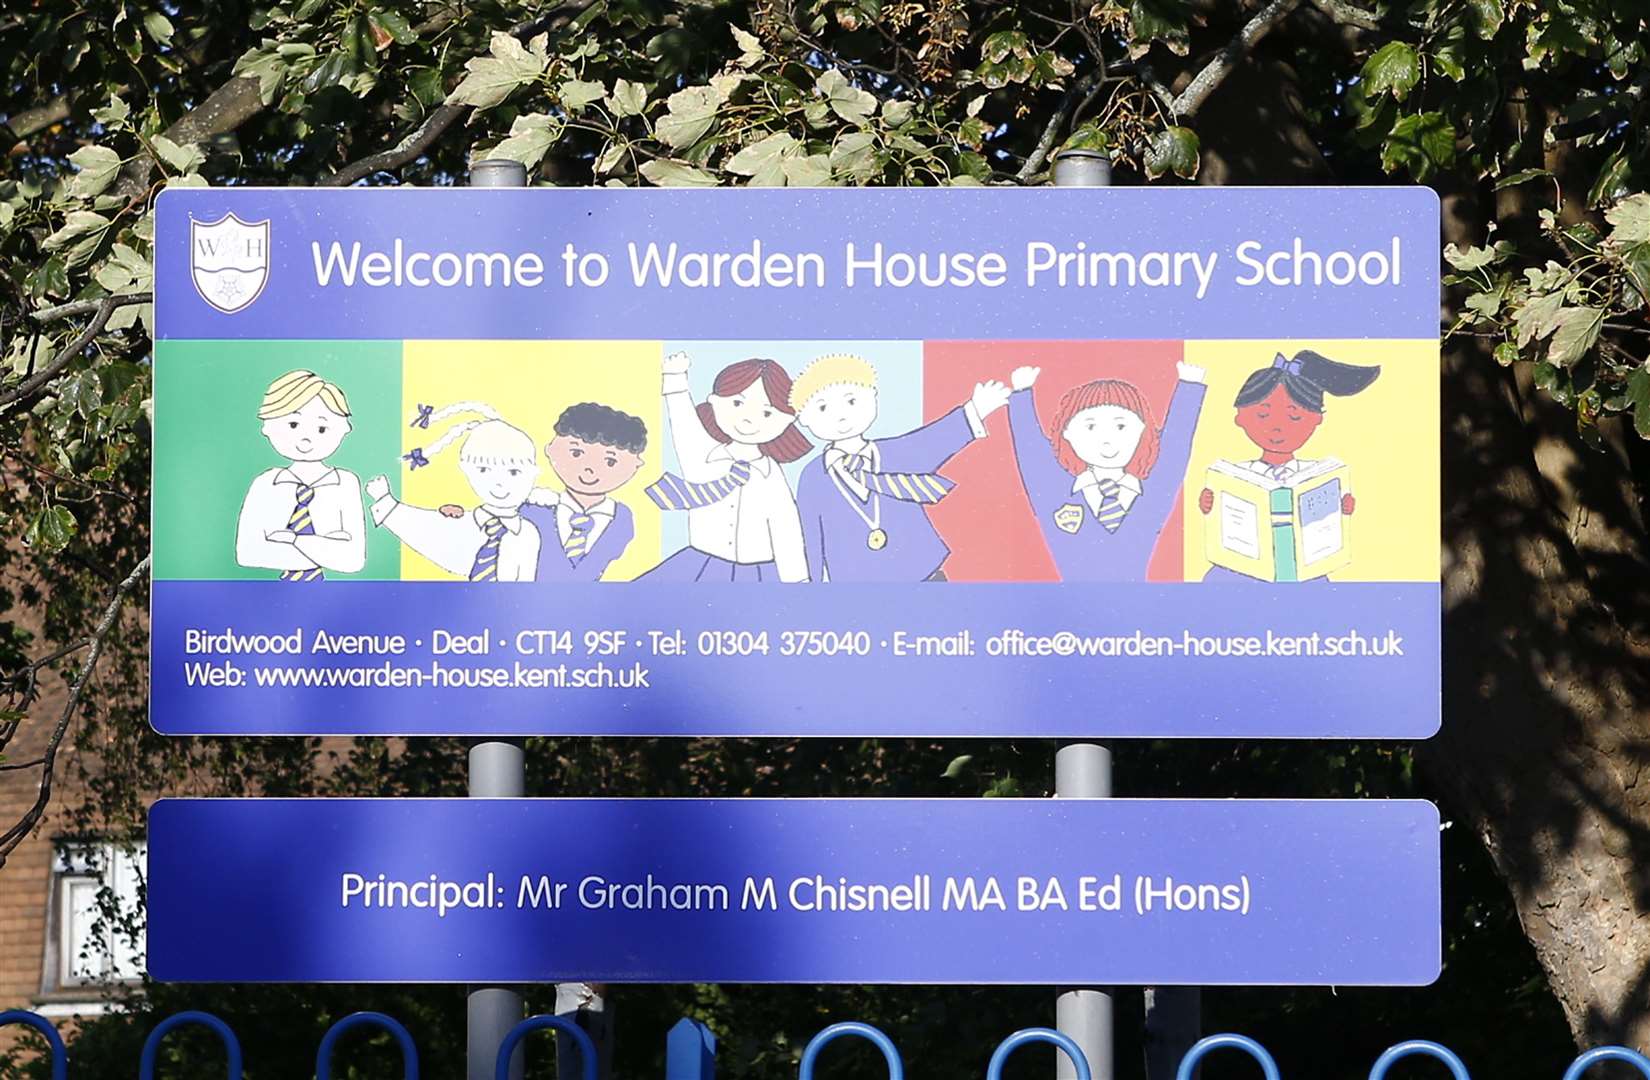 Warden House Primary in Deal has closed its Year R bubble